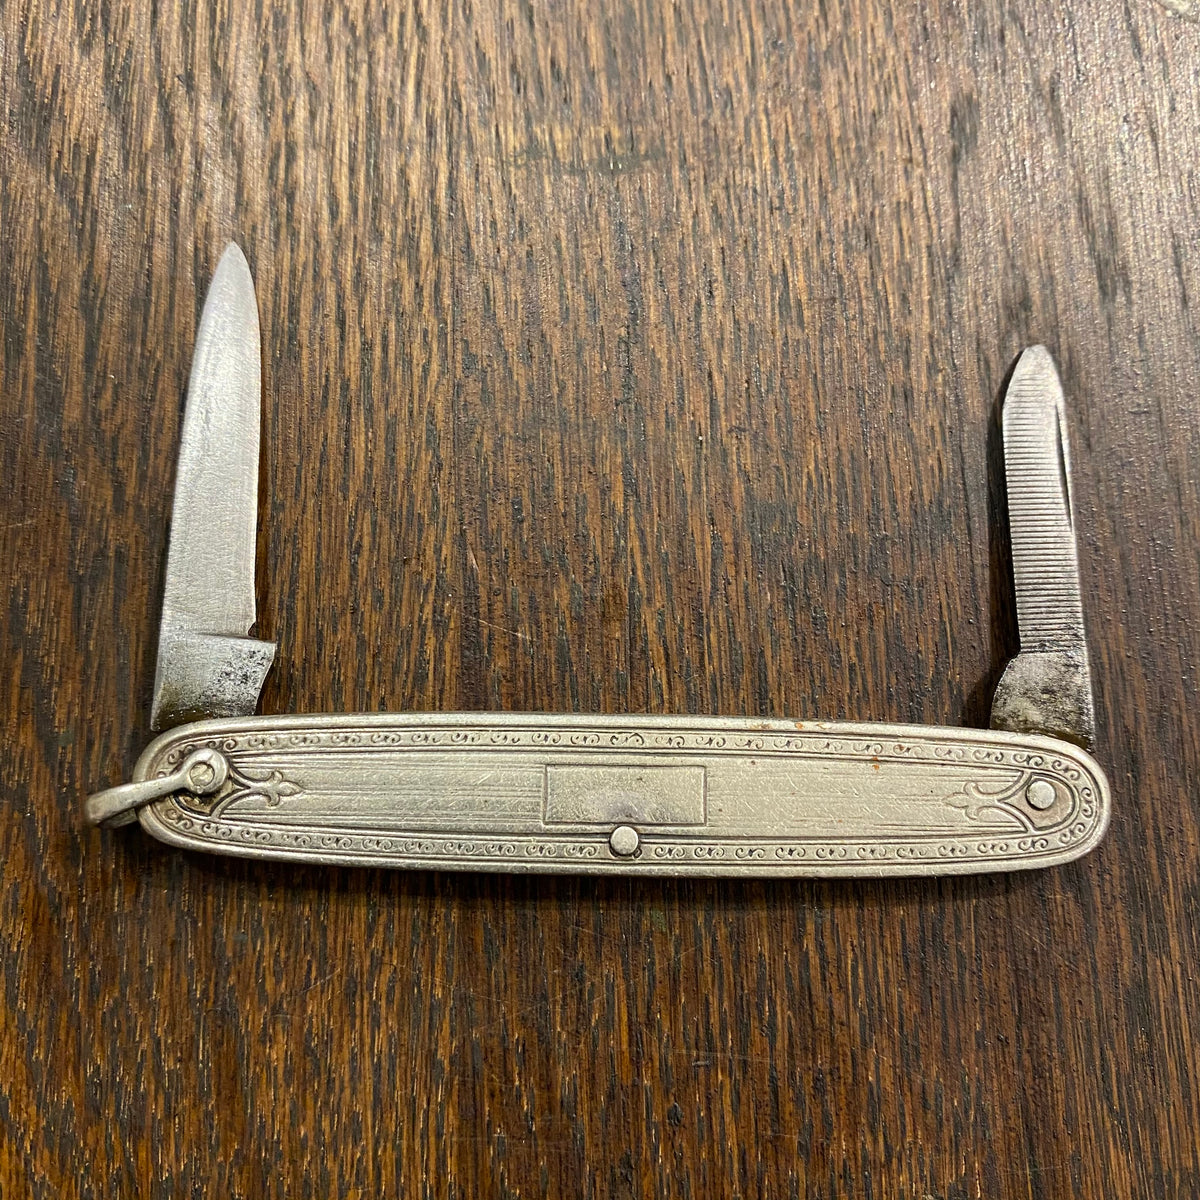 LF&C  3” Pen Carbon Blade Silverplate Scales 1912-1950